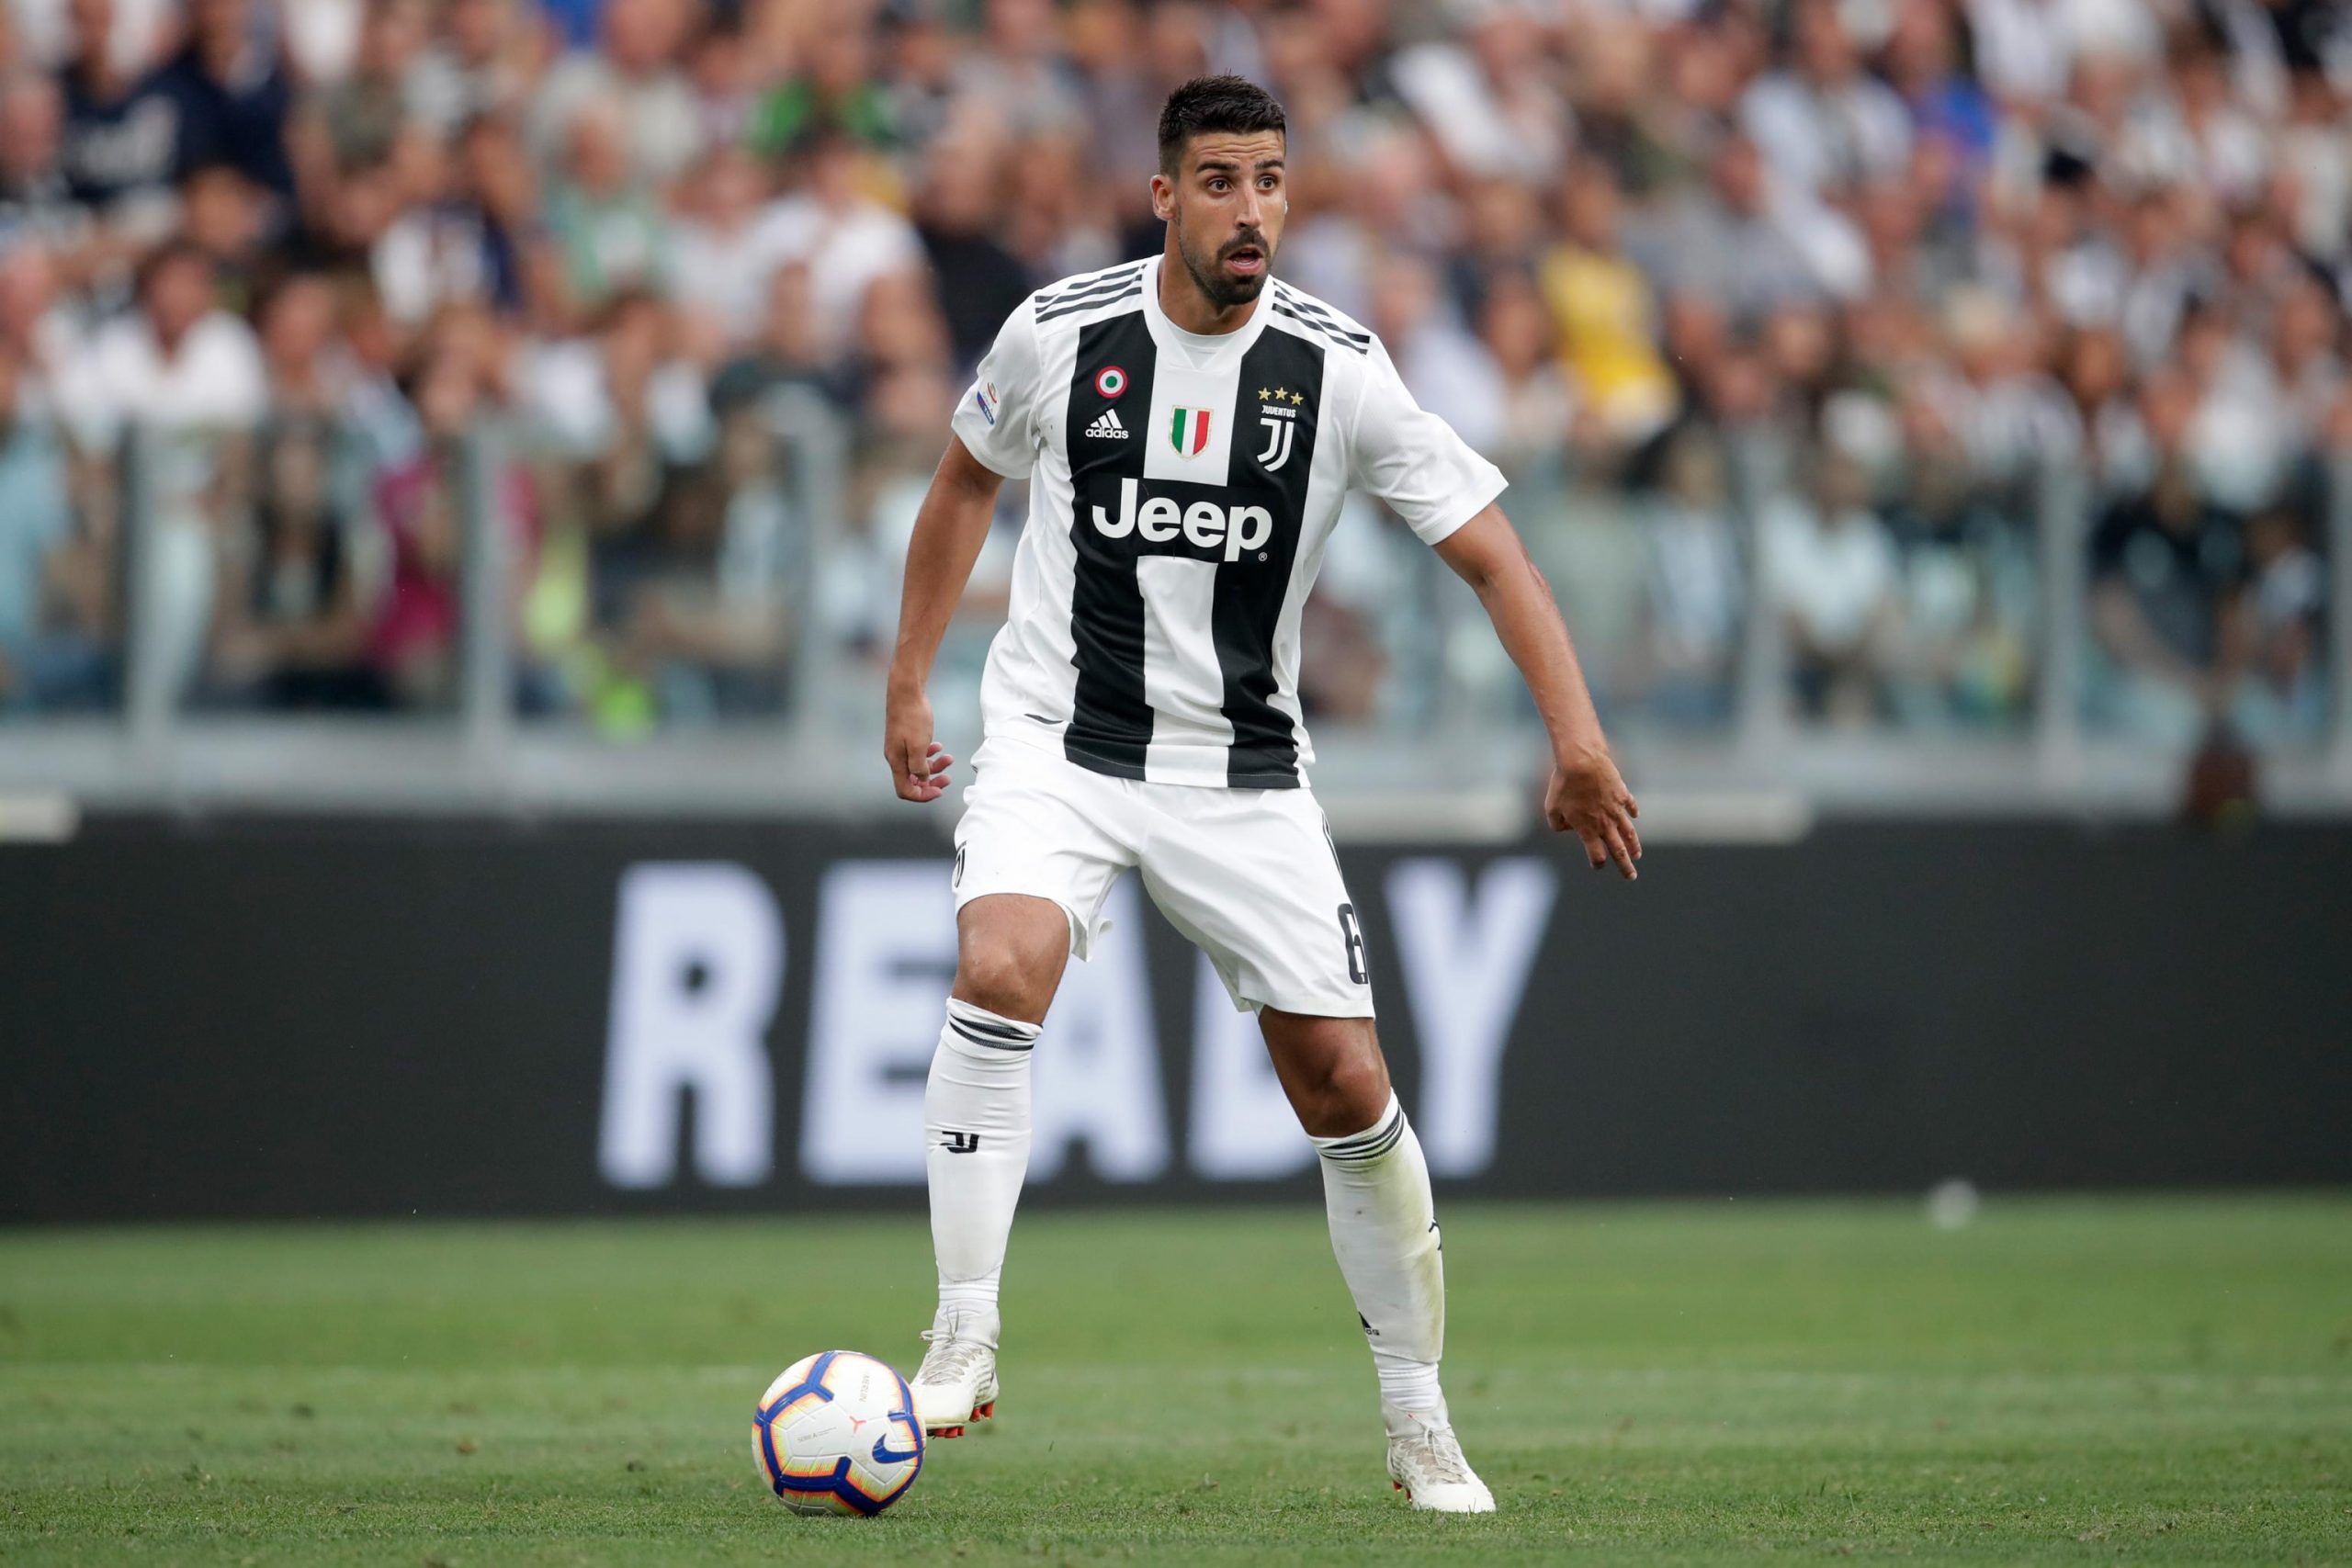 Sami Khedira is in the final year of his contract with Juventus